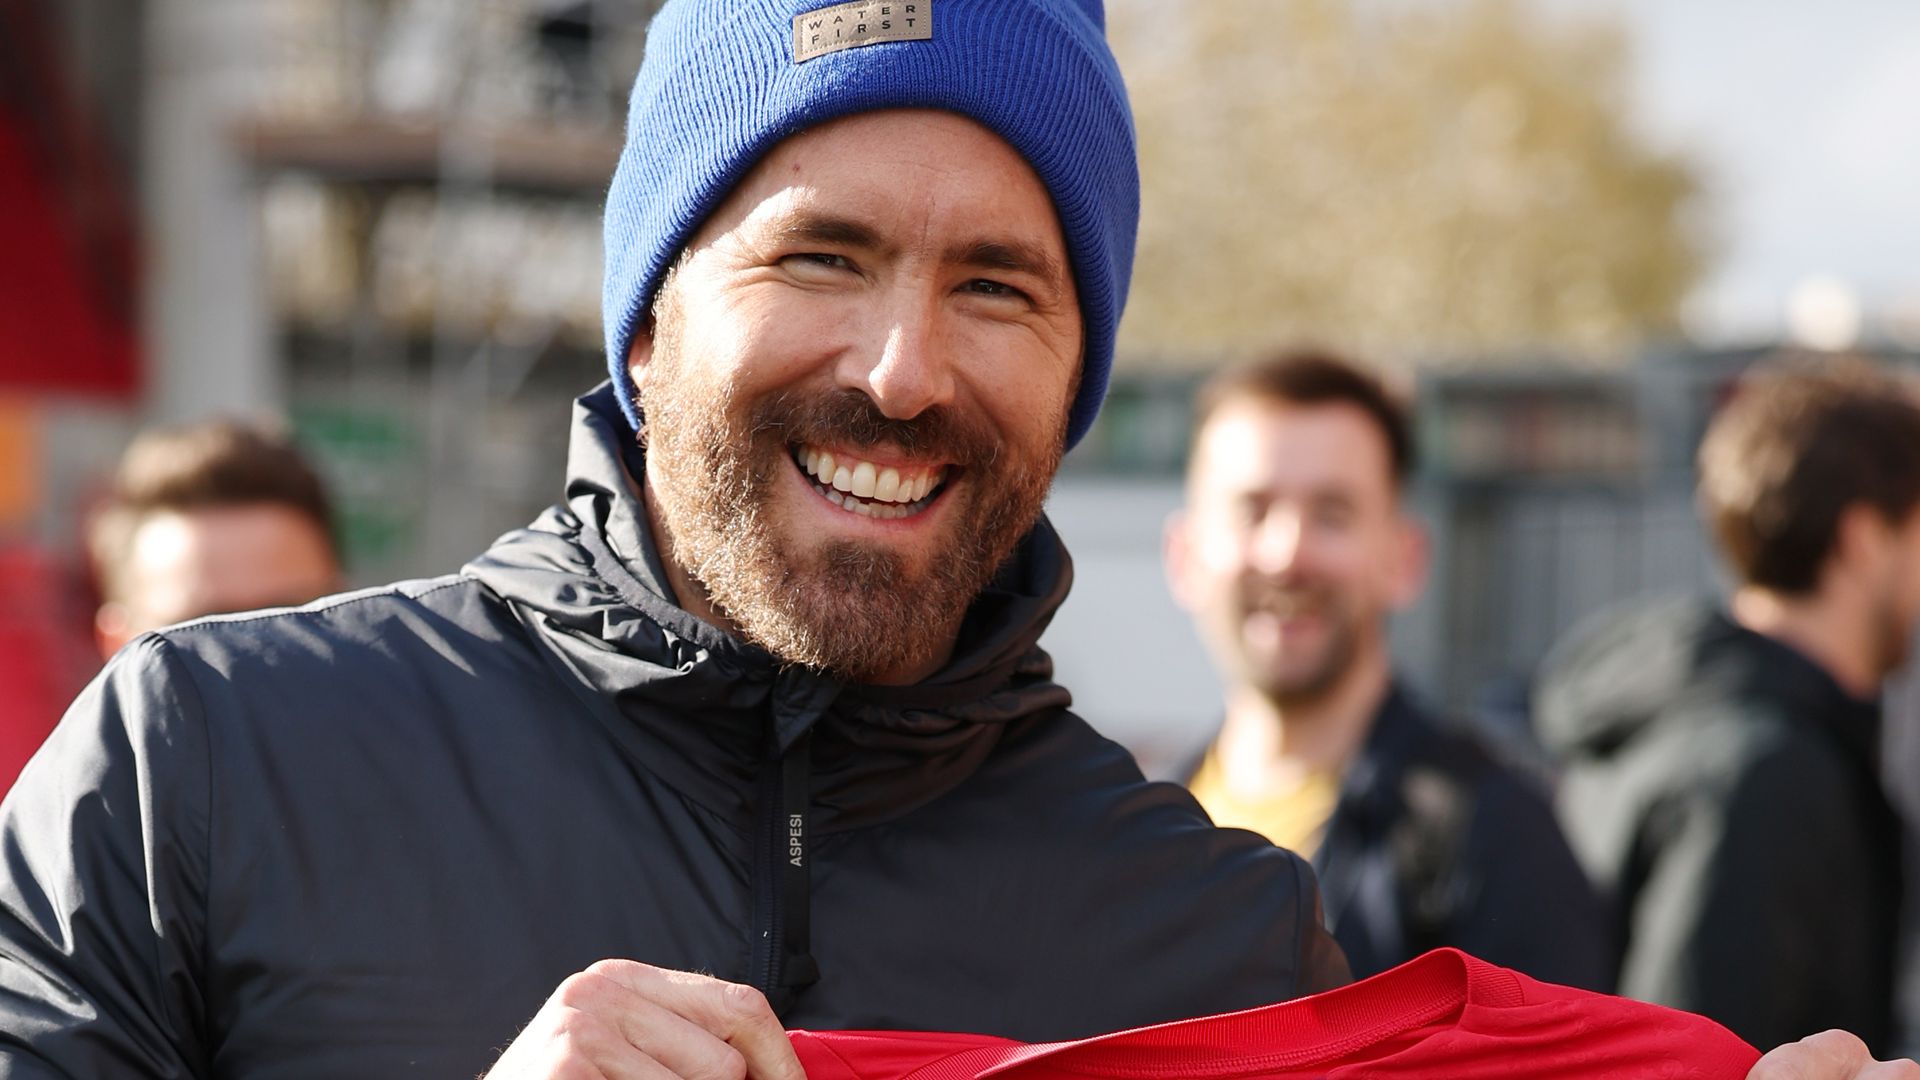 Ryan Reynolds smiling holding up a red football shirt